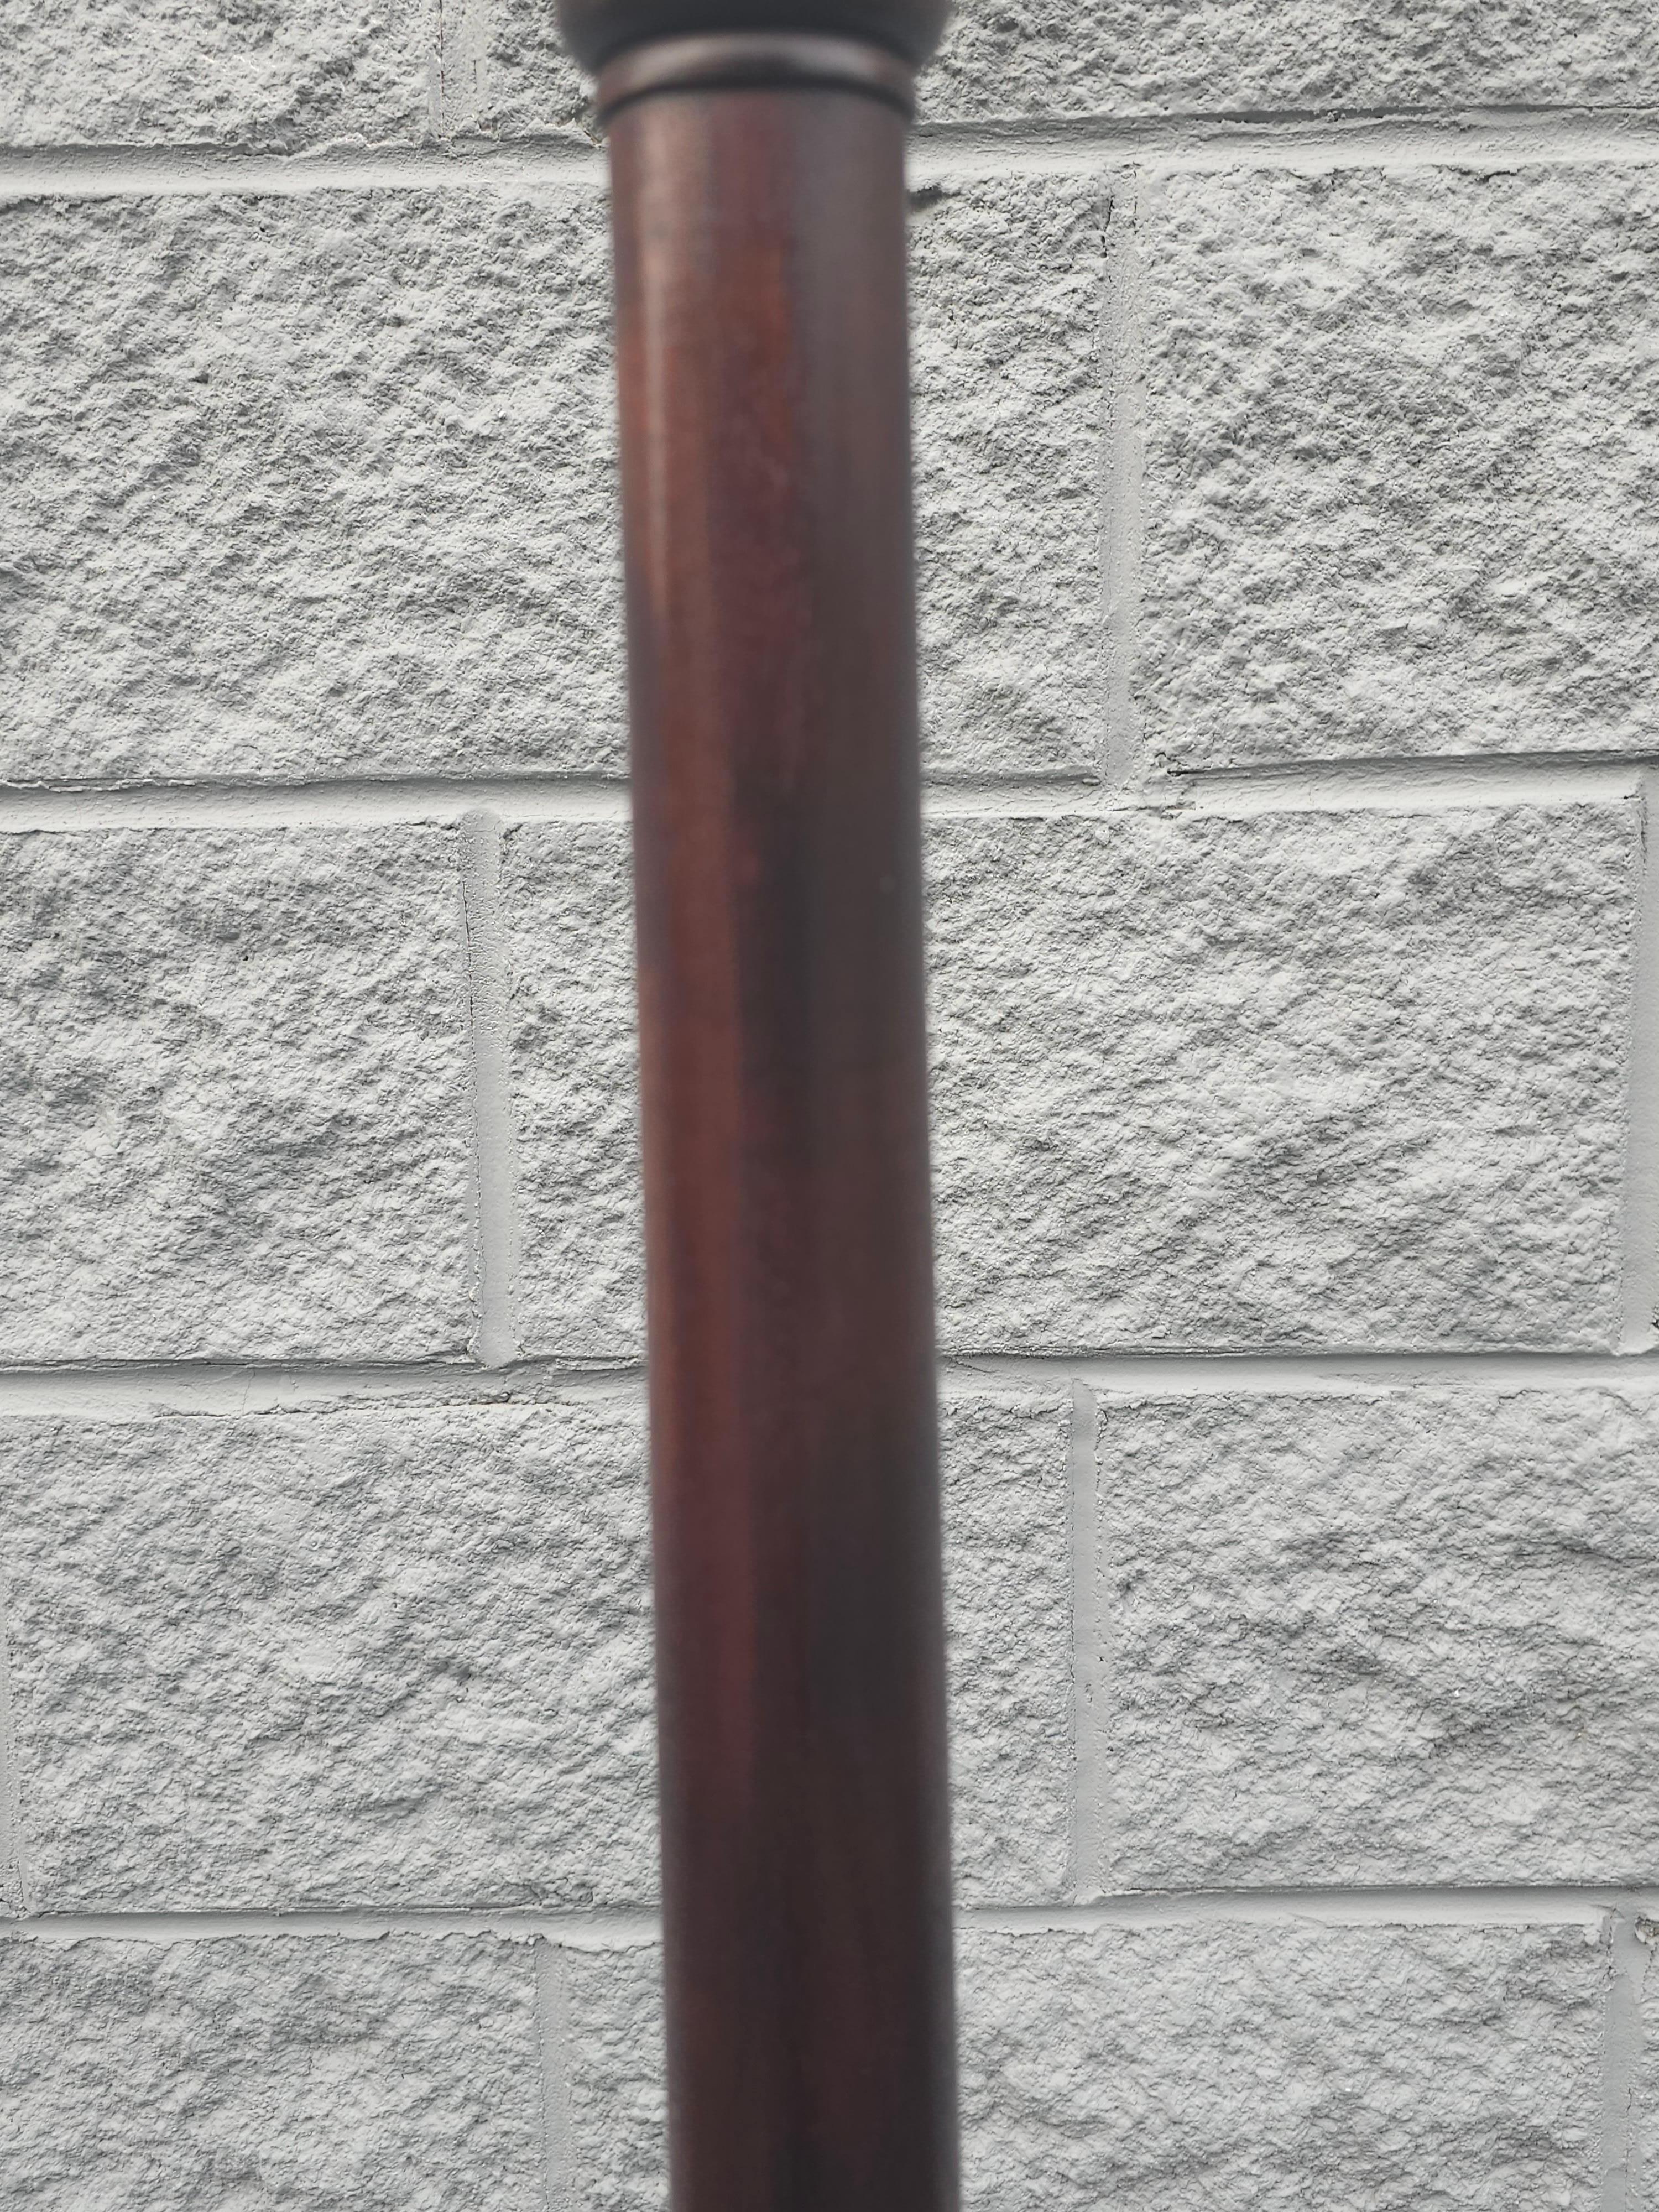 Mid-20th Century Mahogany and Brass Inset Dual Lights Floor Lamp For Sale 4